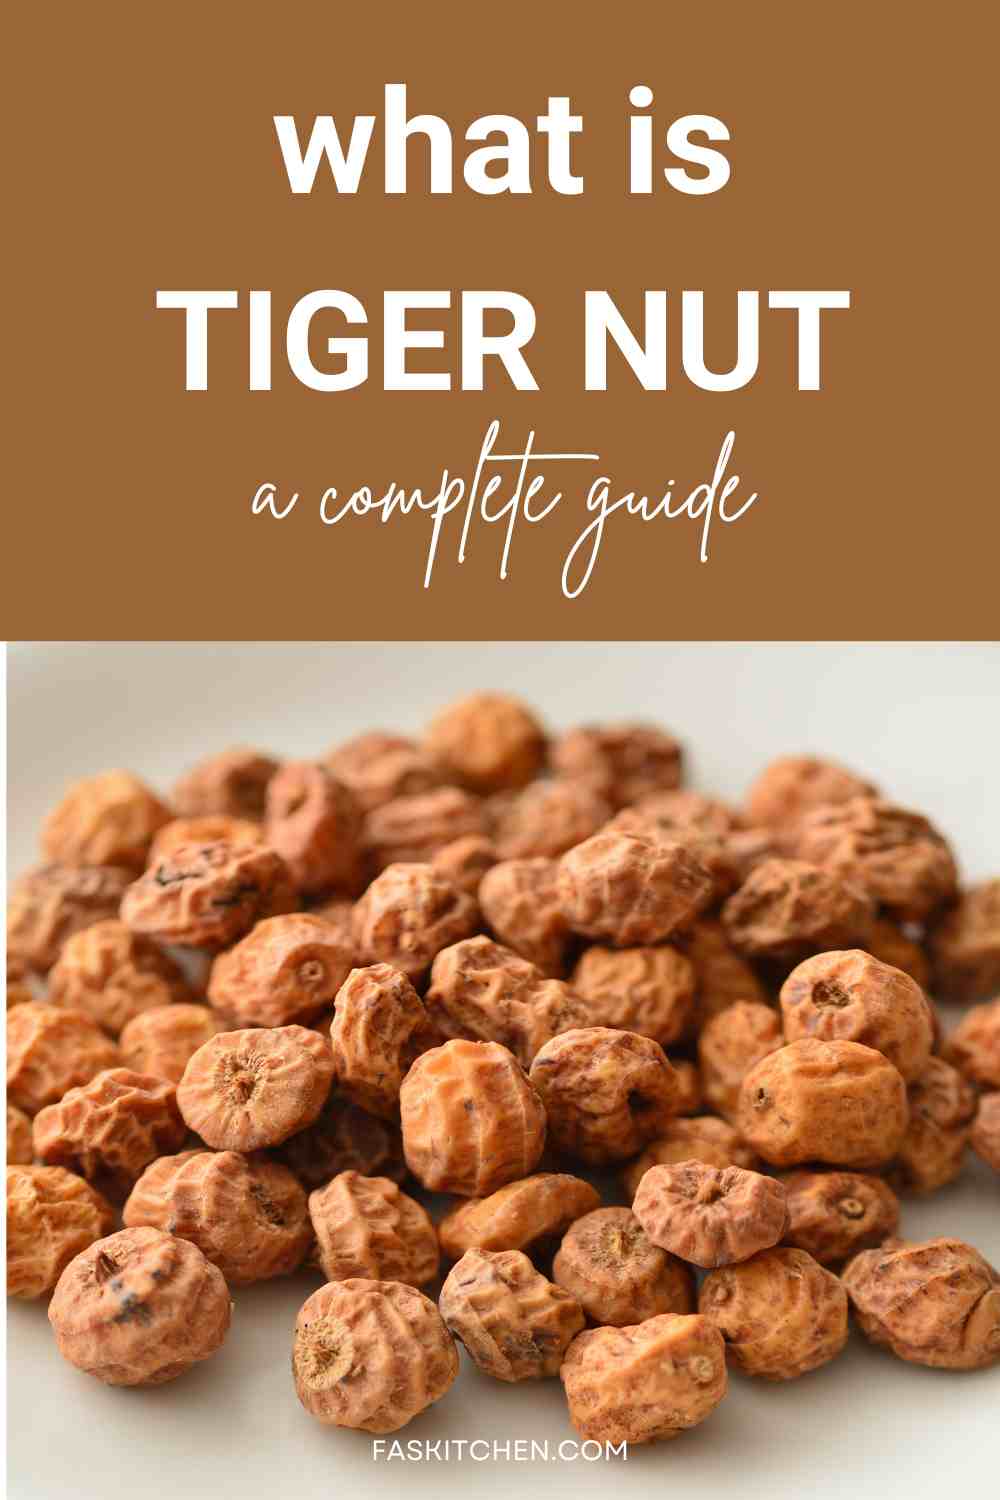 Tiger Nut 101 Nutrition Benefits How